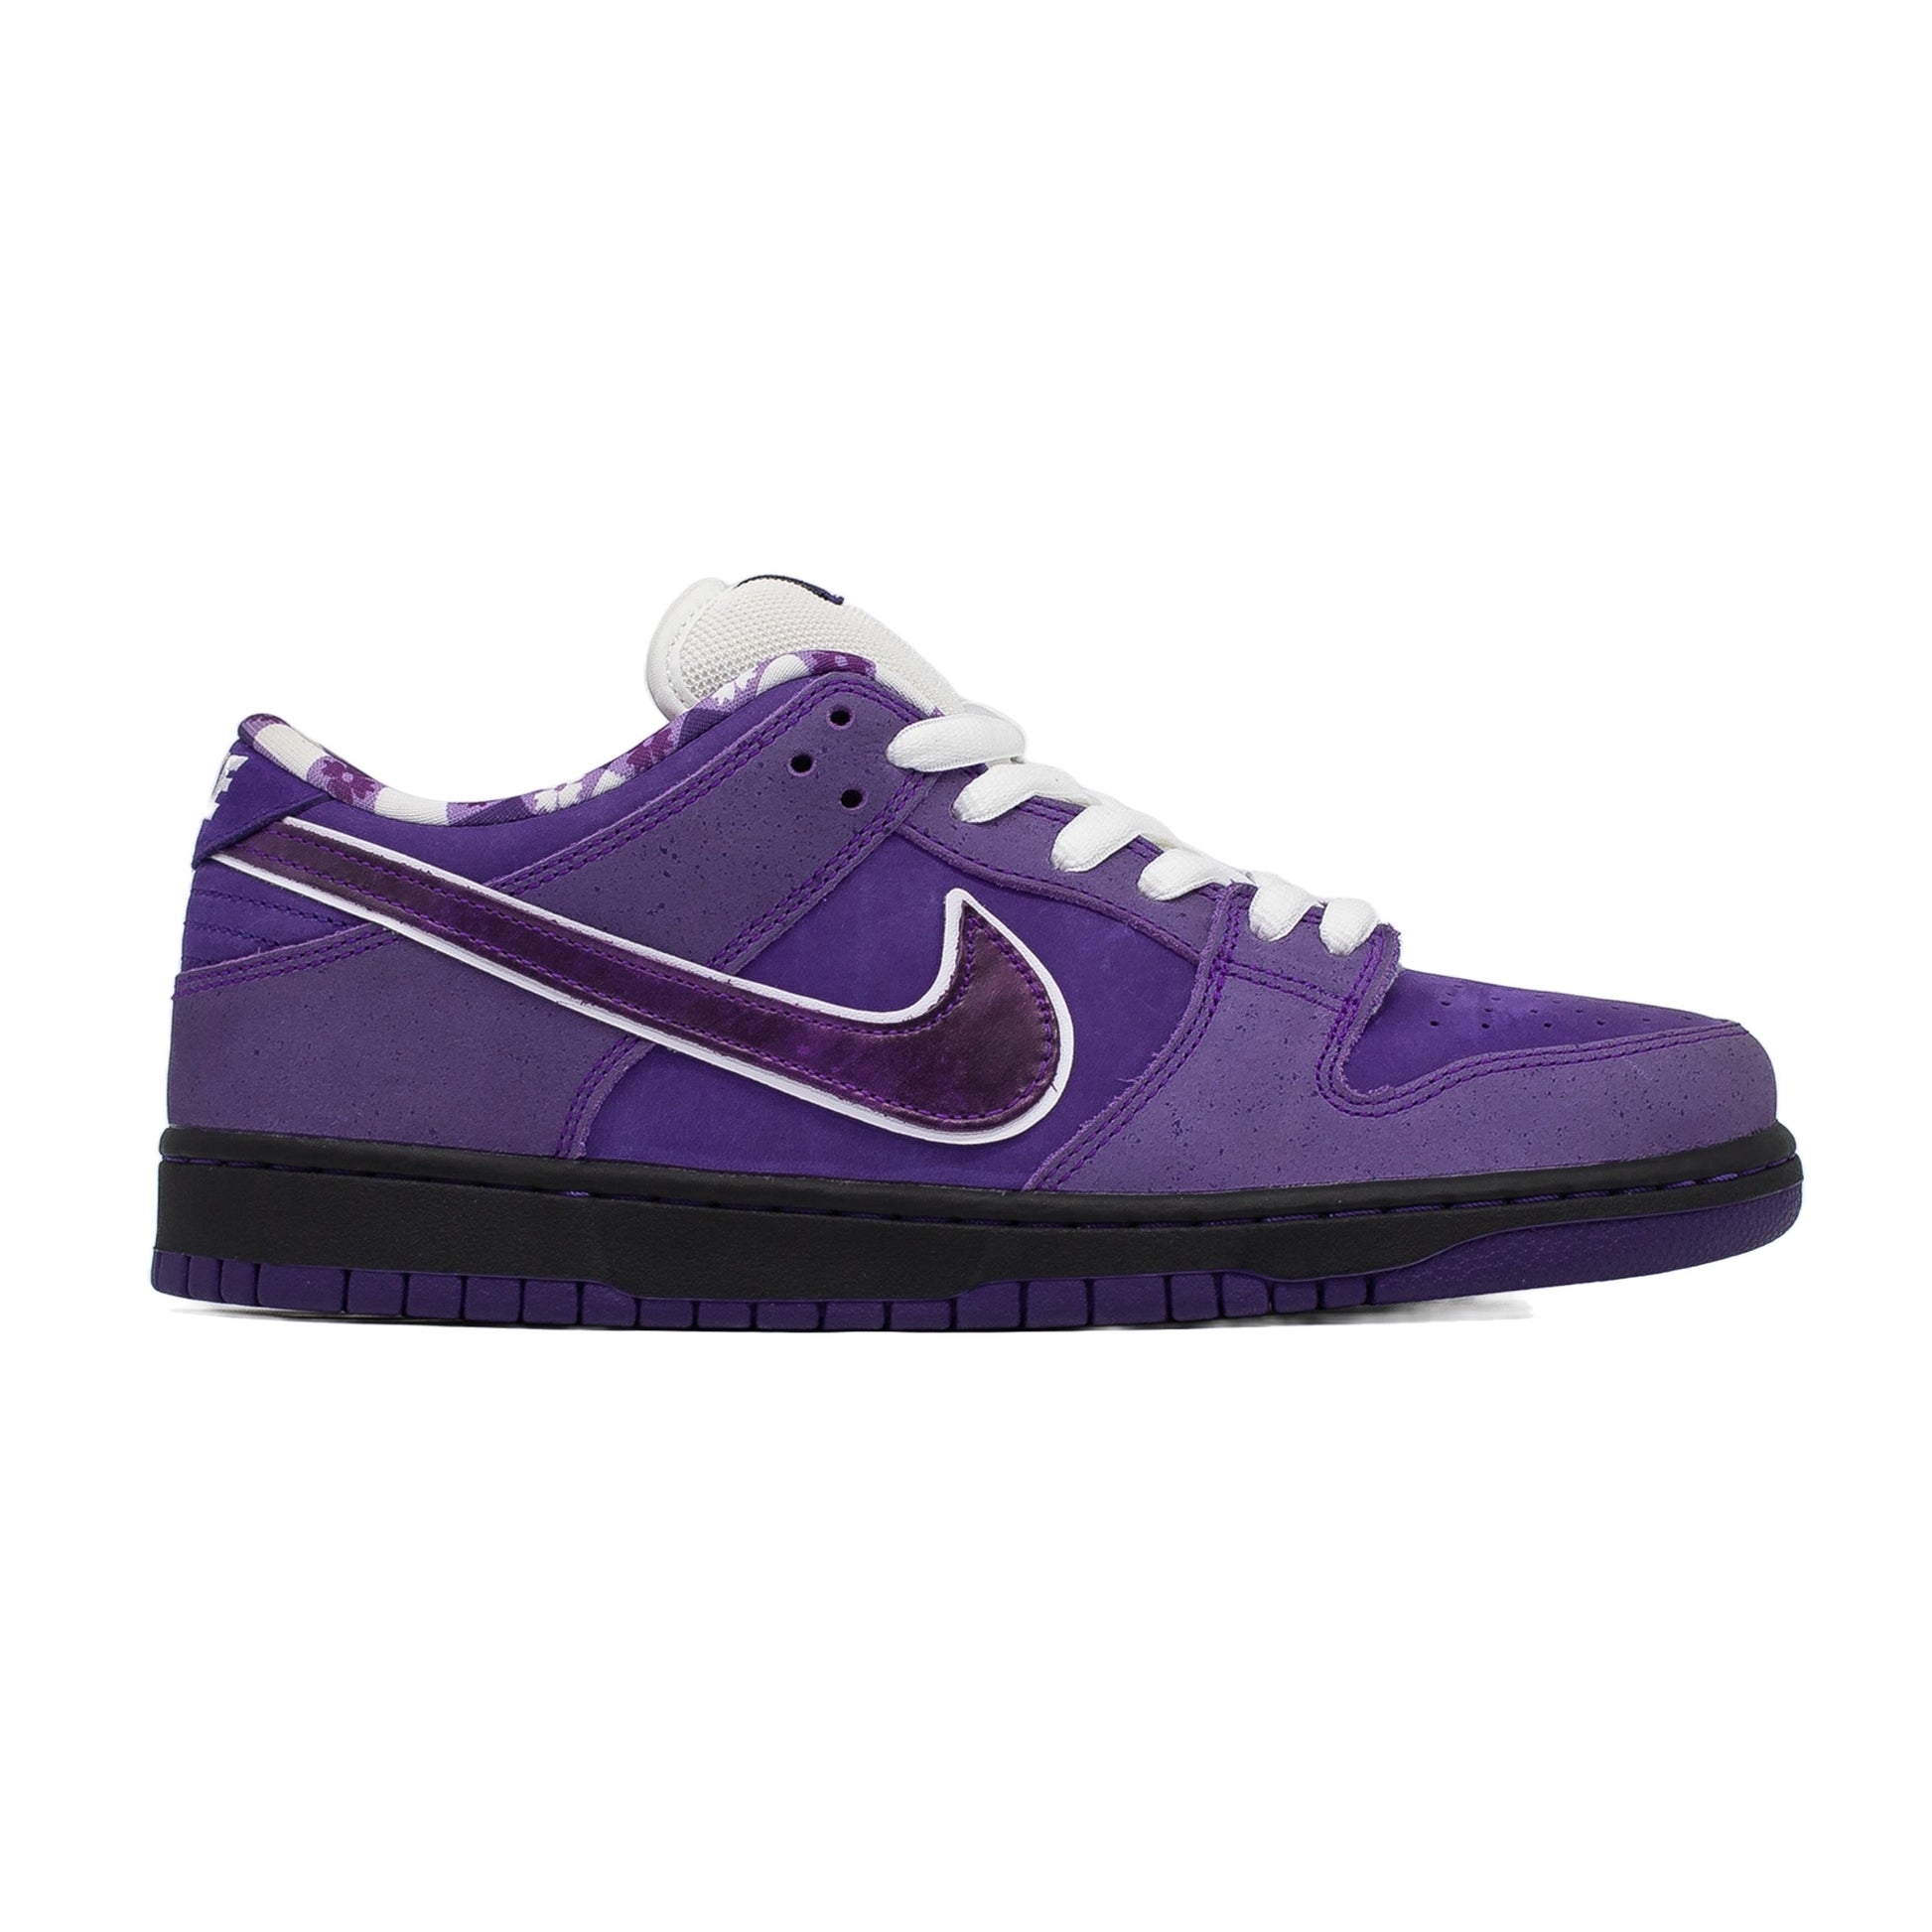 Nike SB Dunk Low, Concepts Purple Lobster